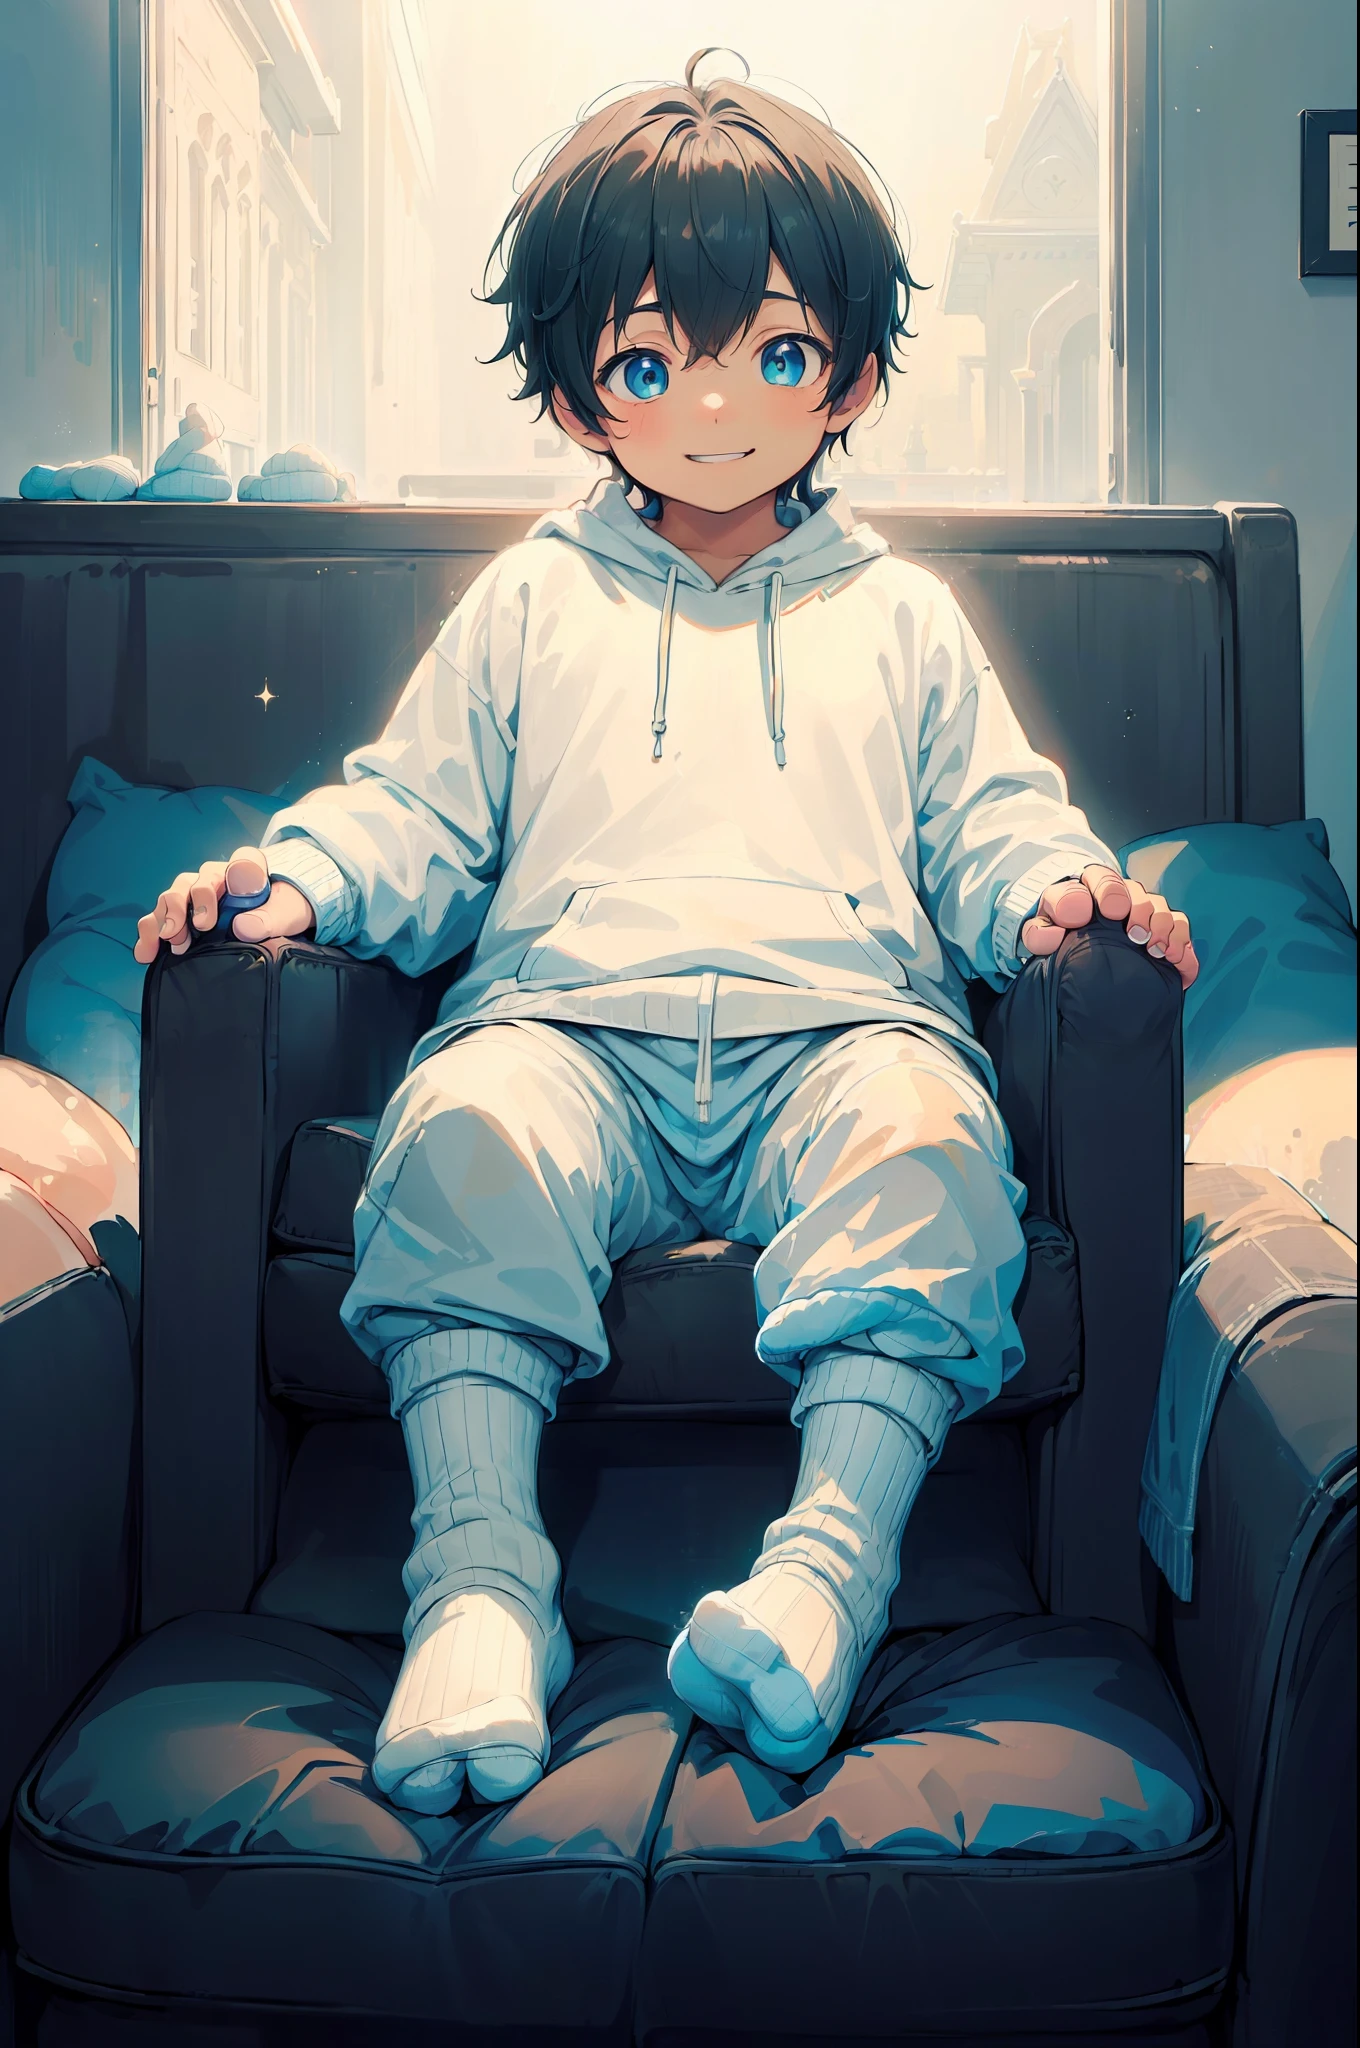 Masterpiece, chubby Little boy with dark cyan hair and shiny gold colored eyes and small socks wearing a hoodie, and oversized sweatpants sitting on a couch watching tv in a dark room and showing his soles, raining outside window, young, boy, , small, toddler, soft light, (sweatpants:1.4), (undersized socks:1.8), (Boy:1.4), (Shota:1.4), (Young:1.4), (Male:1.4), (smiling:1.4), (foot:1.6), (shy:1.4), (pastel:1.0), (colors:1.0), (cute colors:1.0), (night:1.0), (foot sole:1.4),